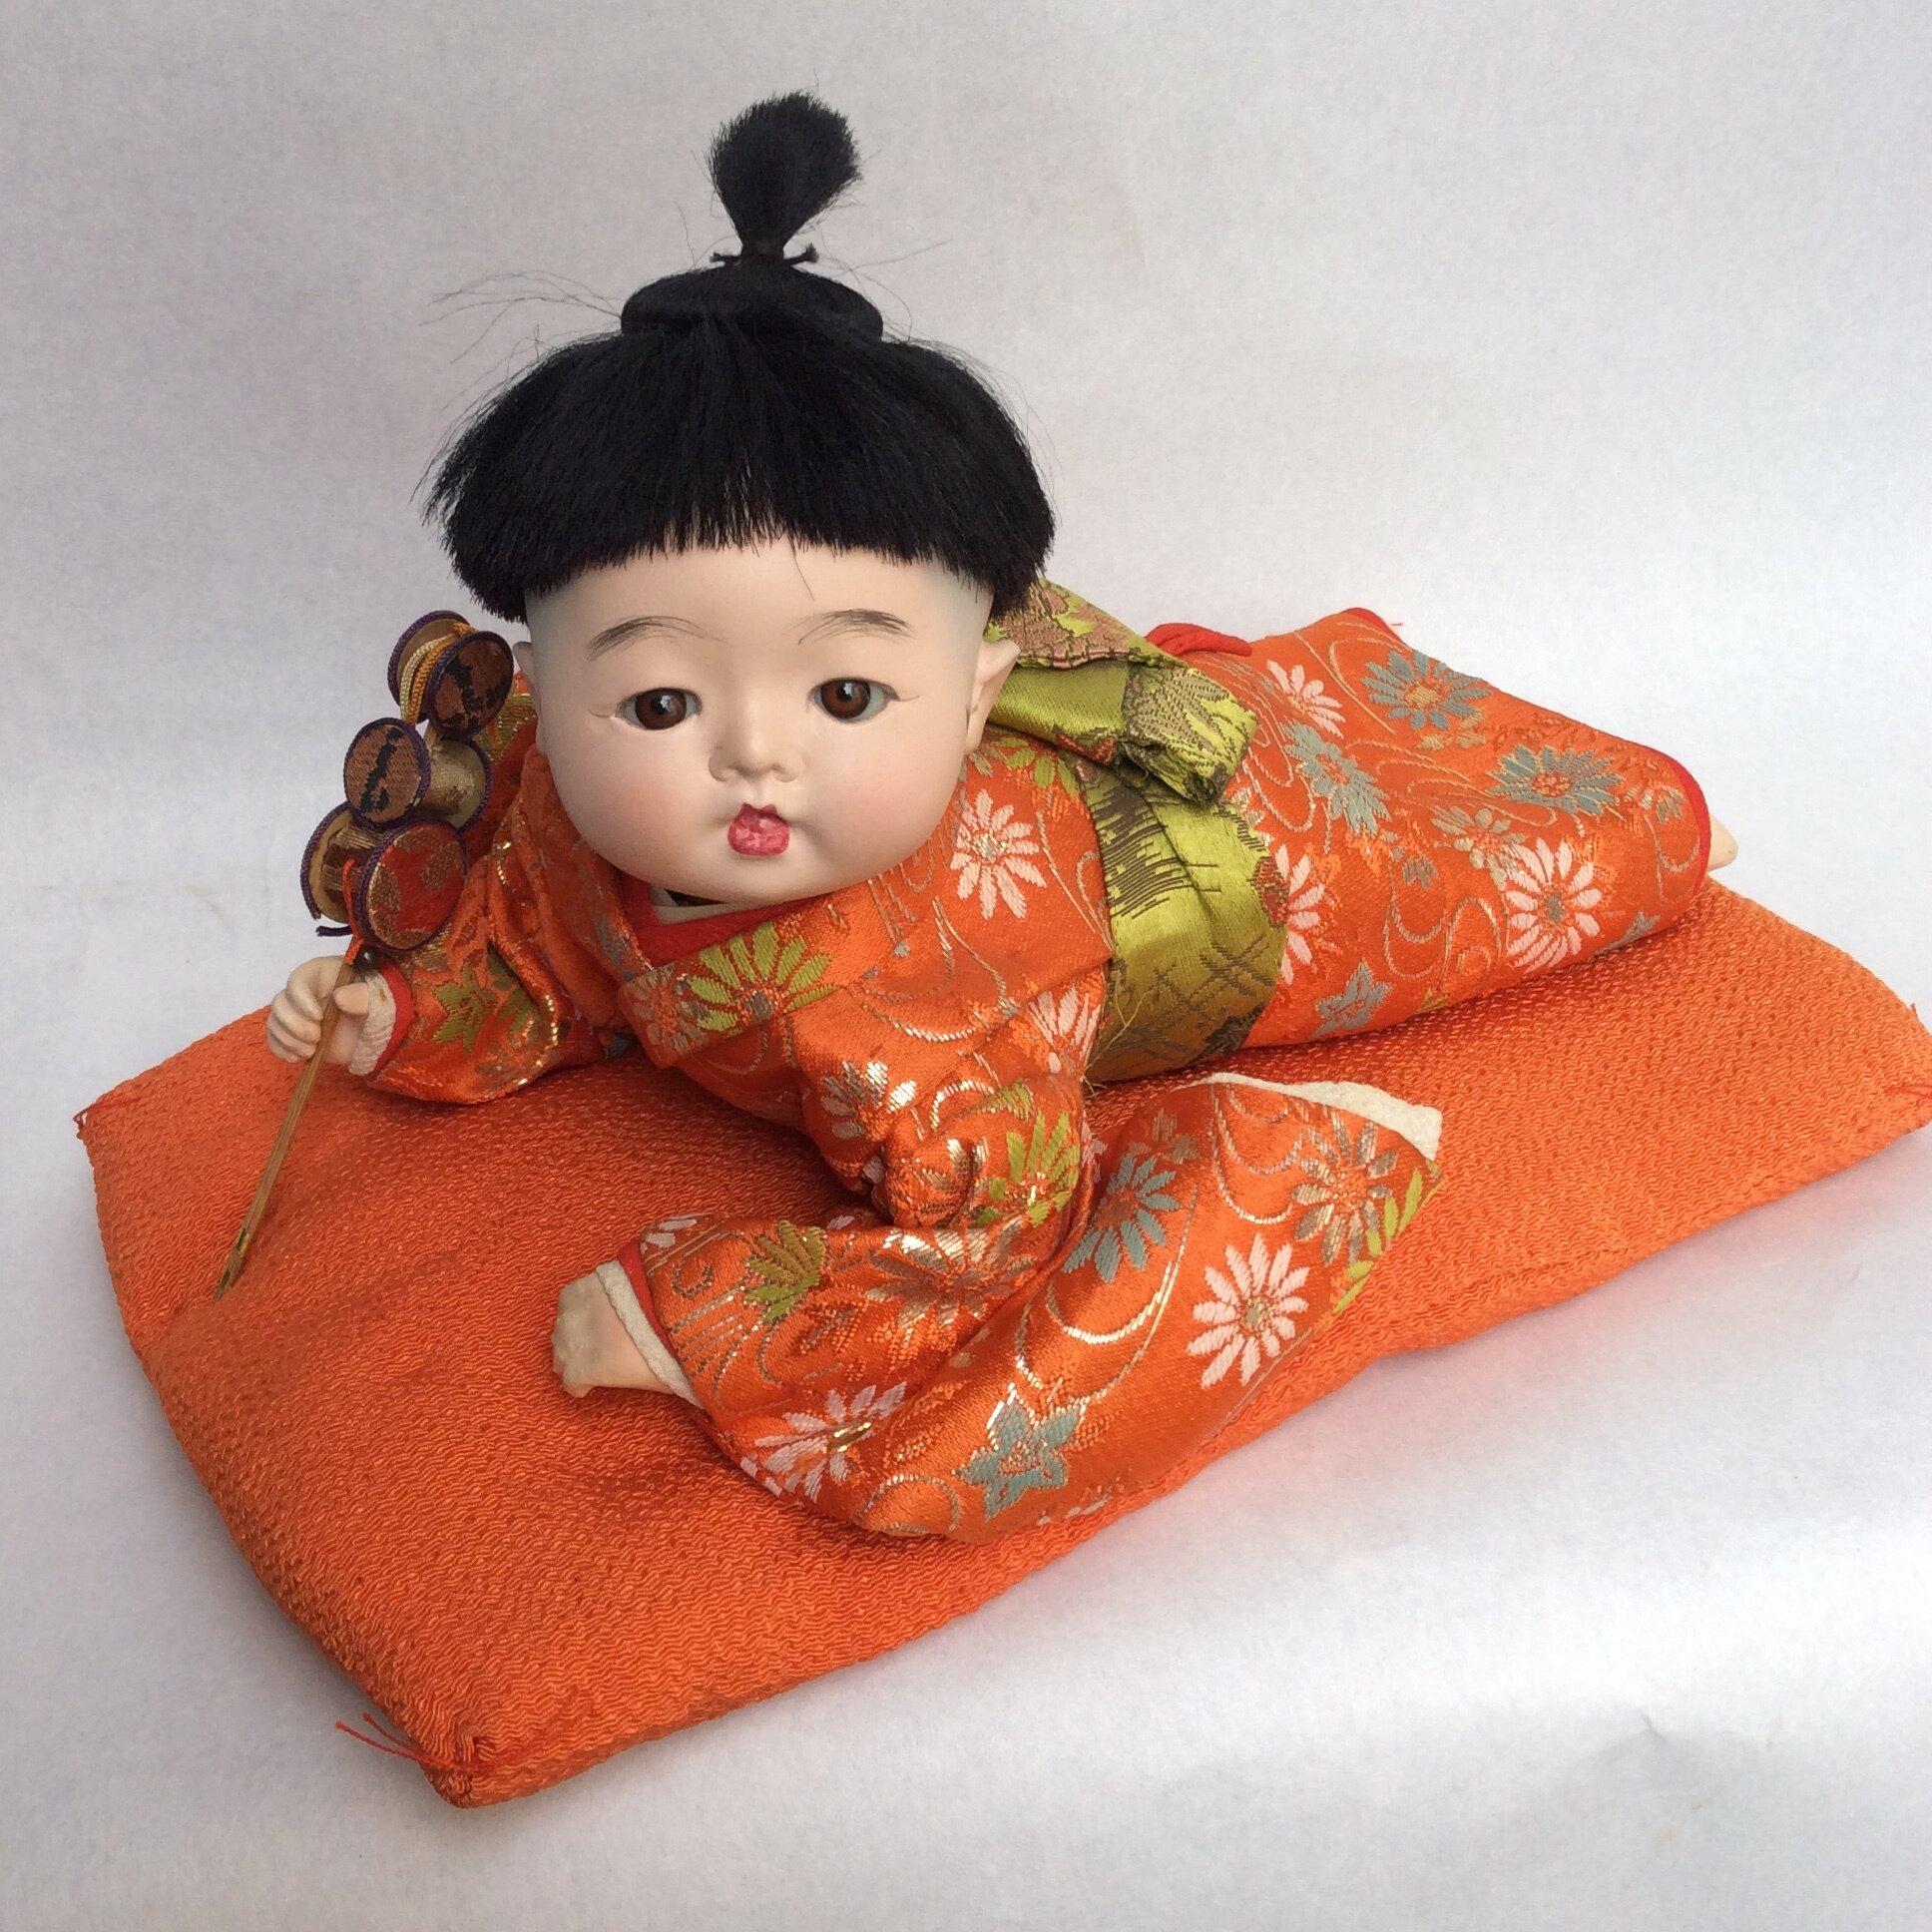 This is a Japanese doll called Ichimatsu doll 'Ichimatsu ningyo'.
This doll was made around 1960s in Showa era. It was made in Prefecture Kyoto, Yamashina city.
This doll will come with a glass case. 

Dimensions:
H25×33×19 cm

Ichimatsu dolls